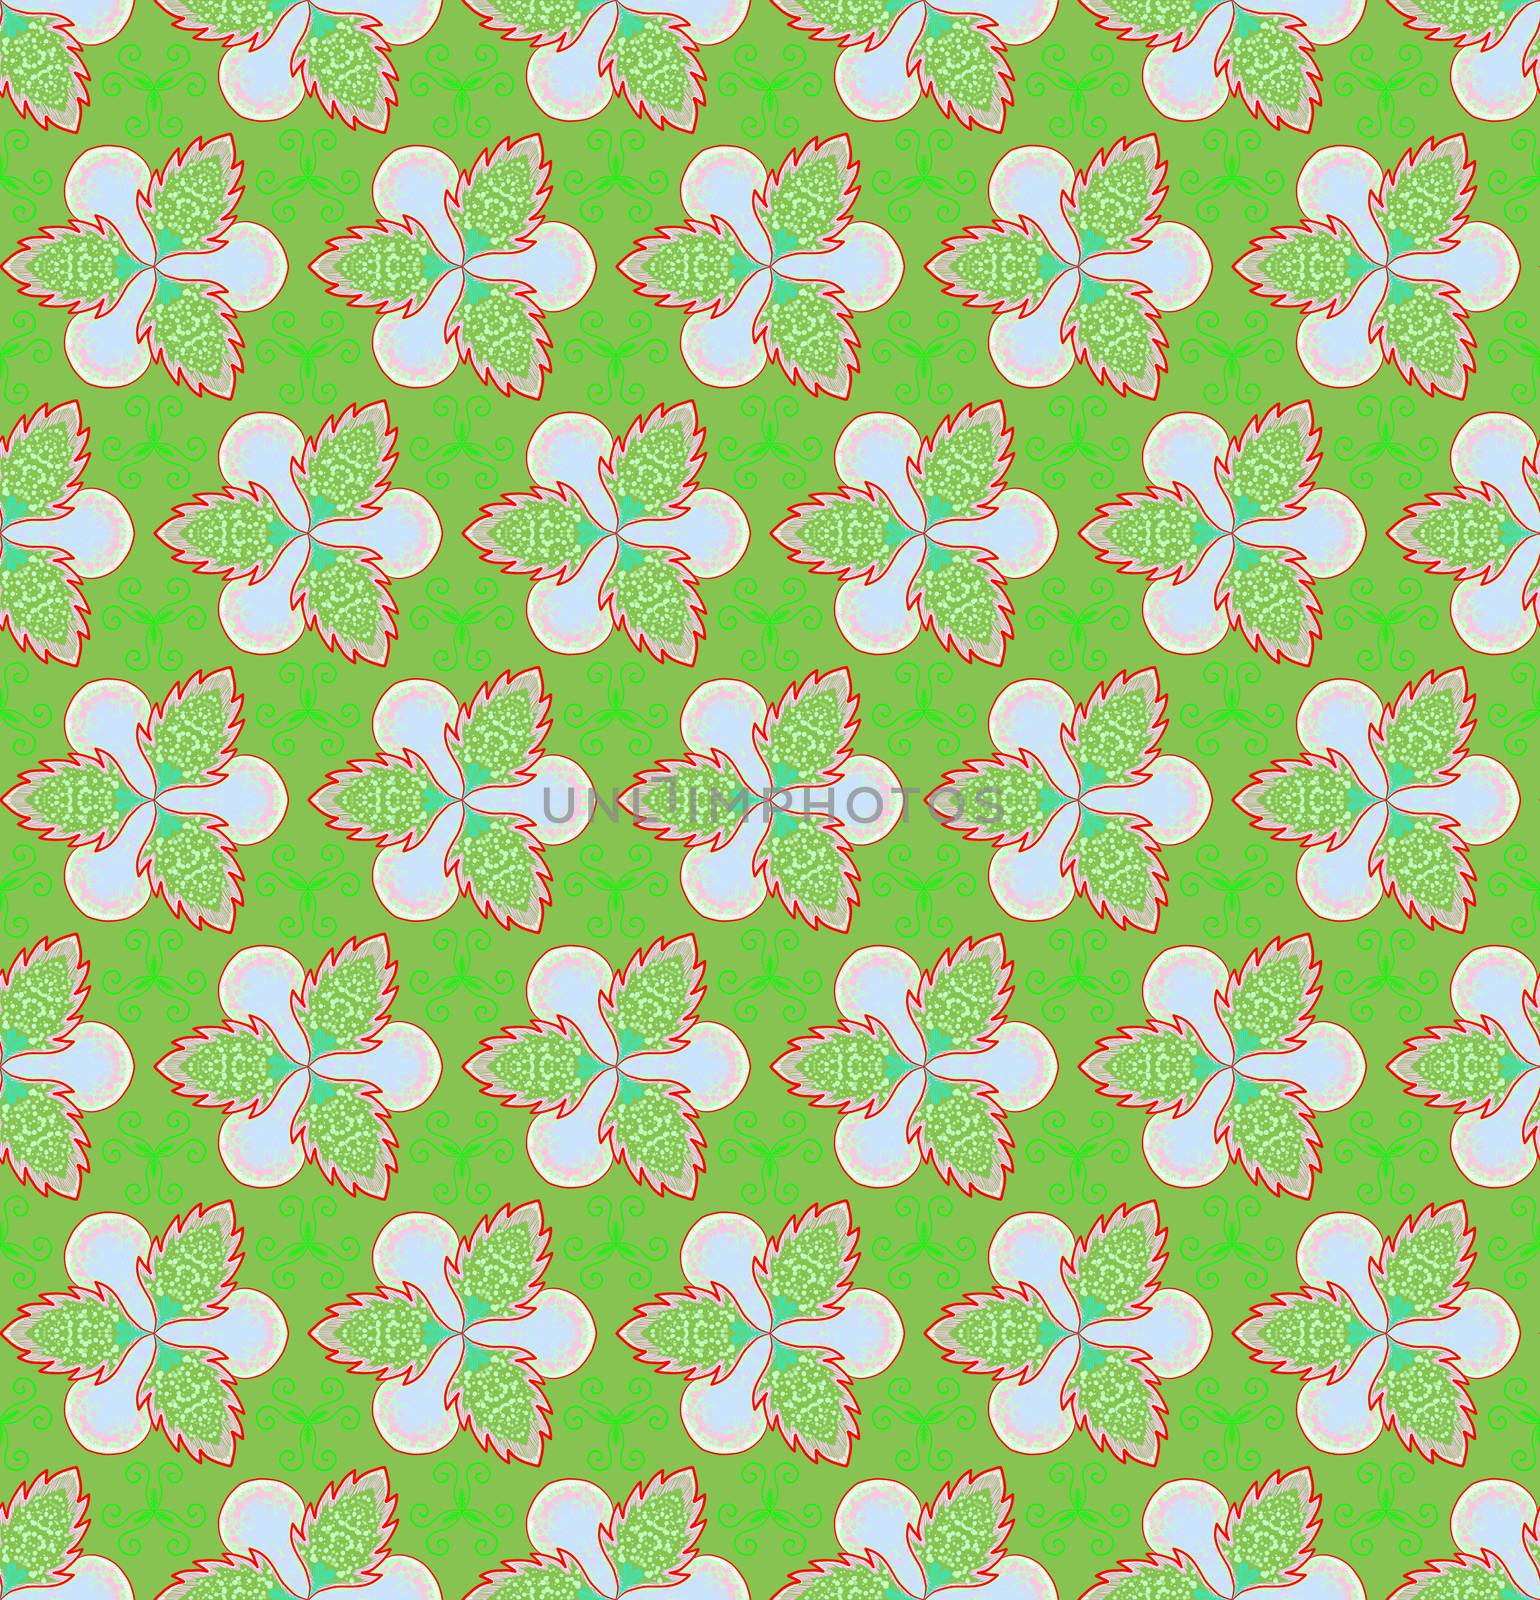 Green flower and ivy on green background Christmas seamless patterns by eaglesky